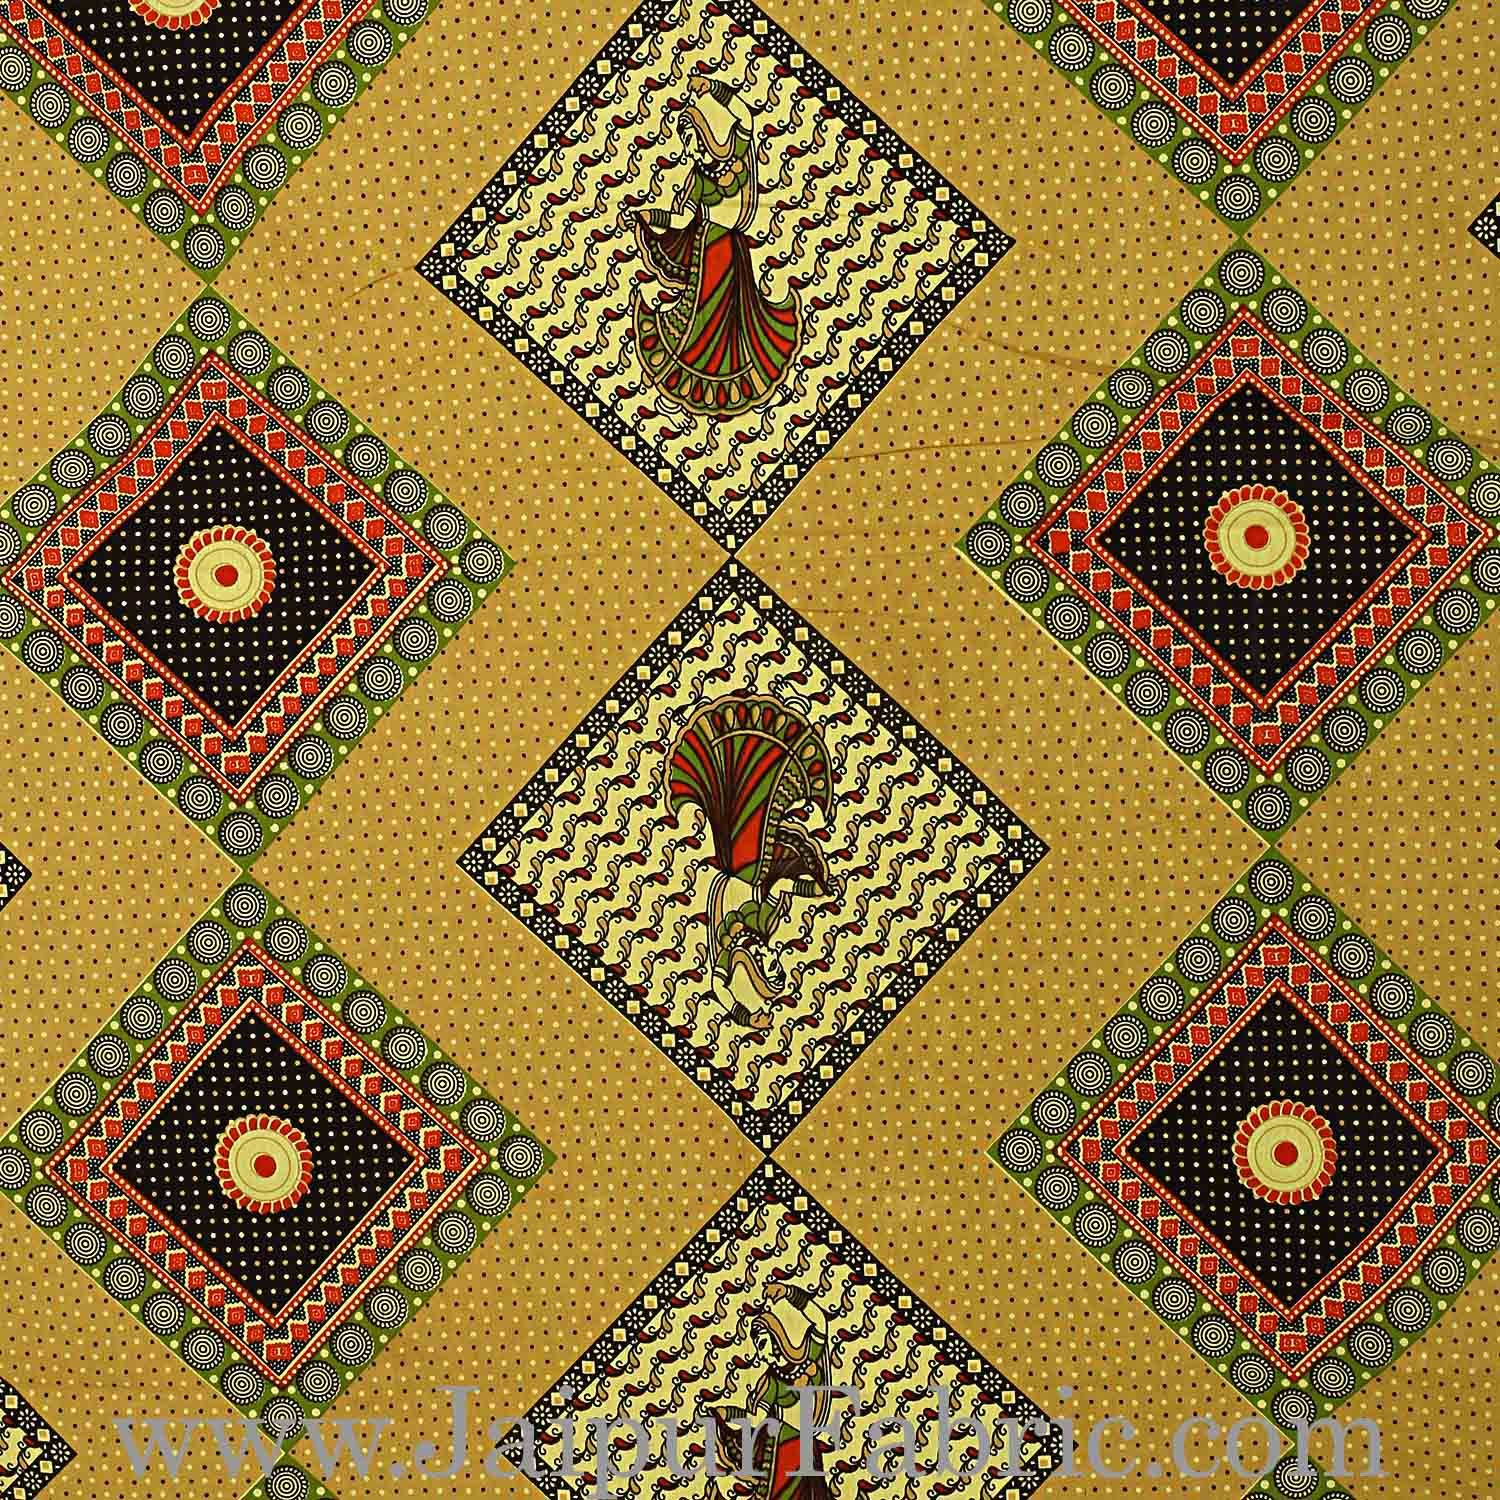 Double bedsheet Brown Color Gujri Dance  Pattern Smooth Touch With 2 Pillow Cover